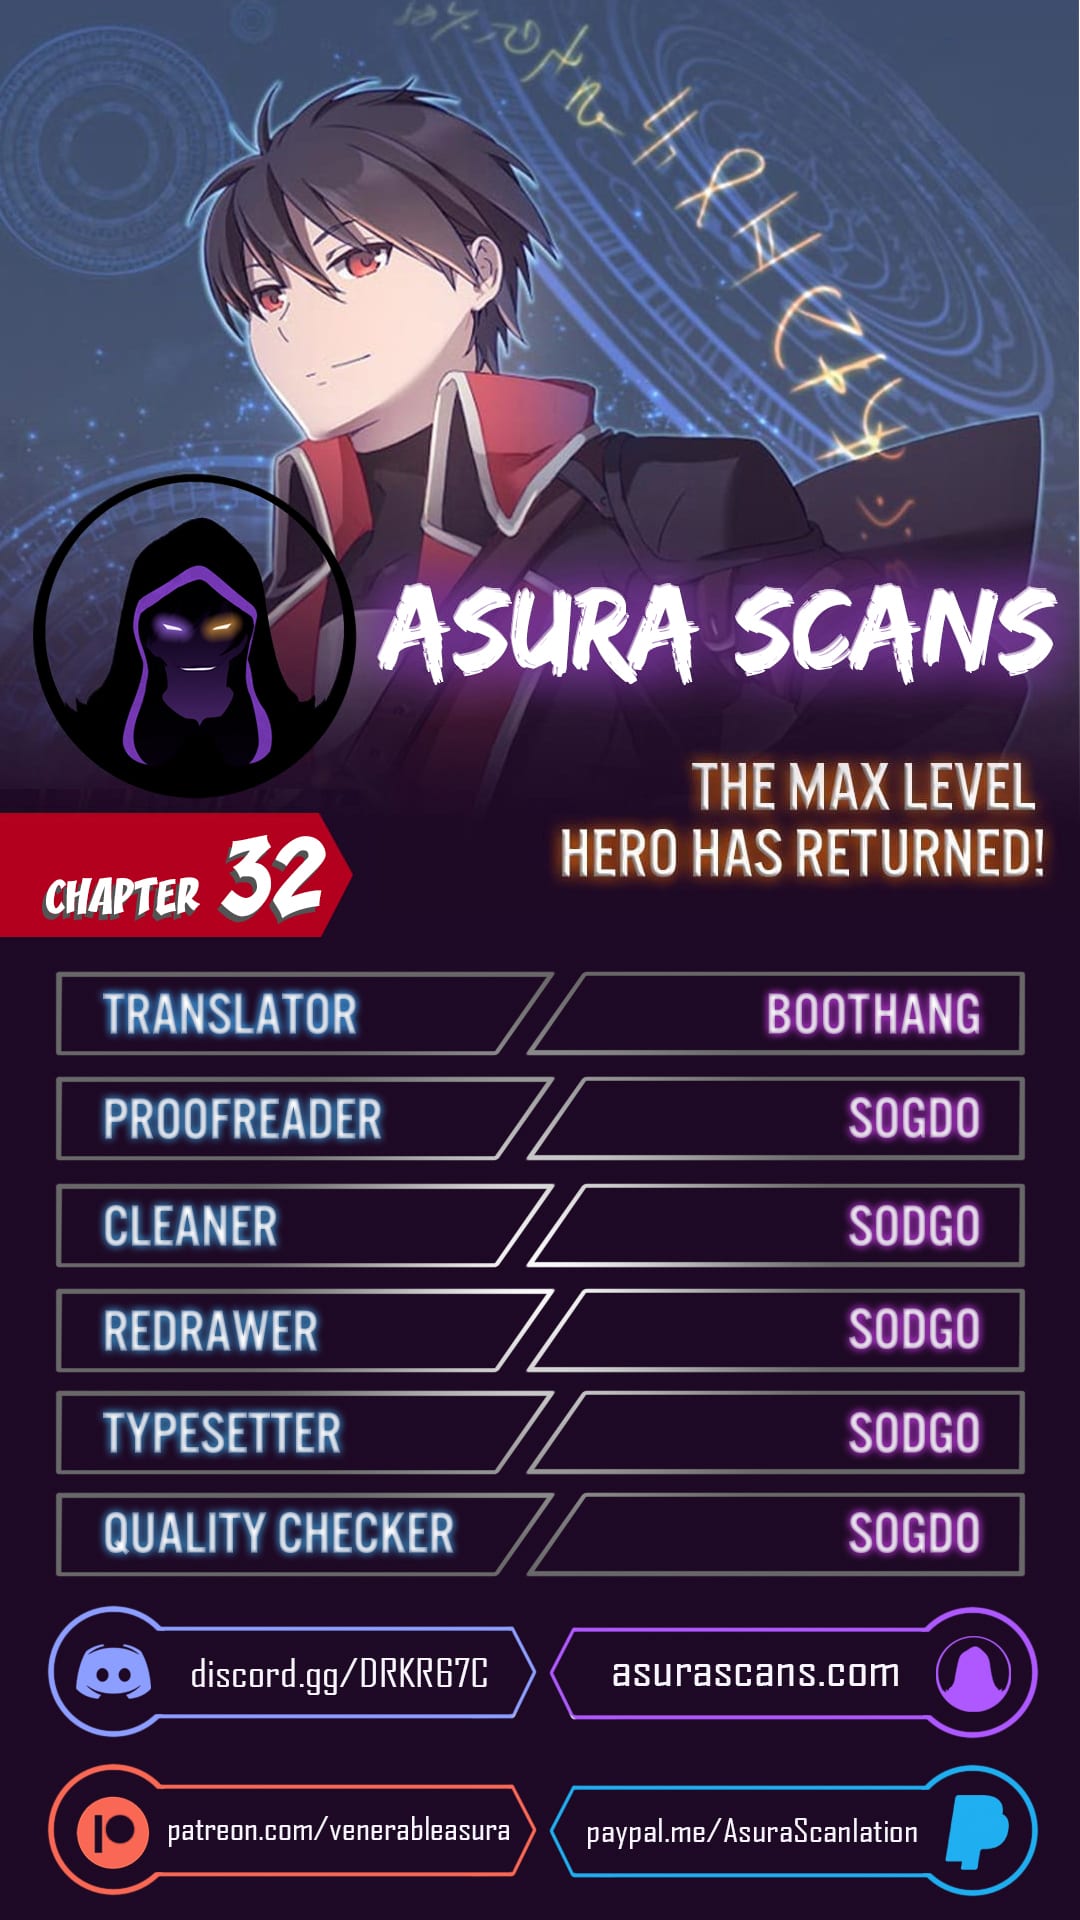 The MAX leveled hero will return! Chapter 32